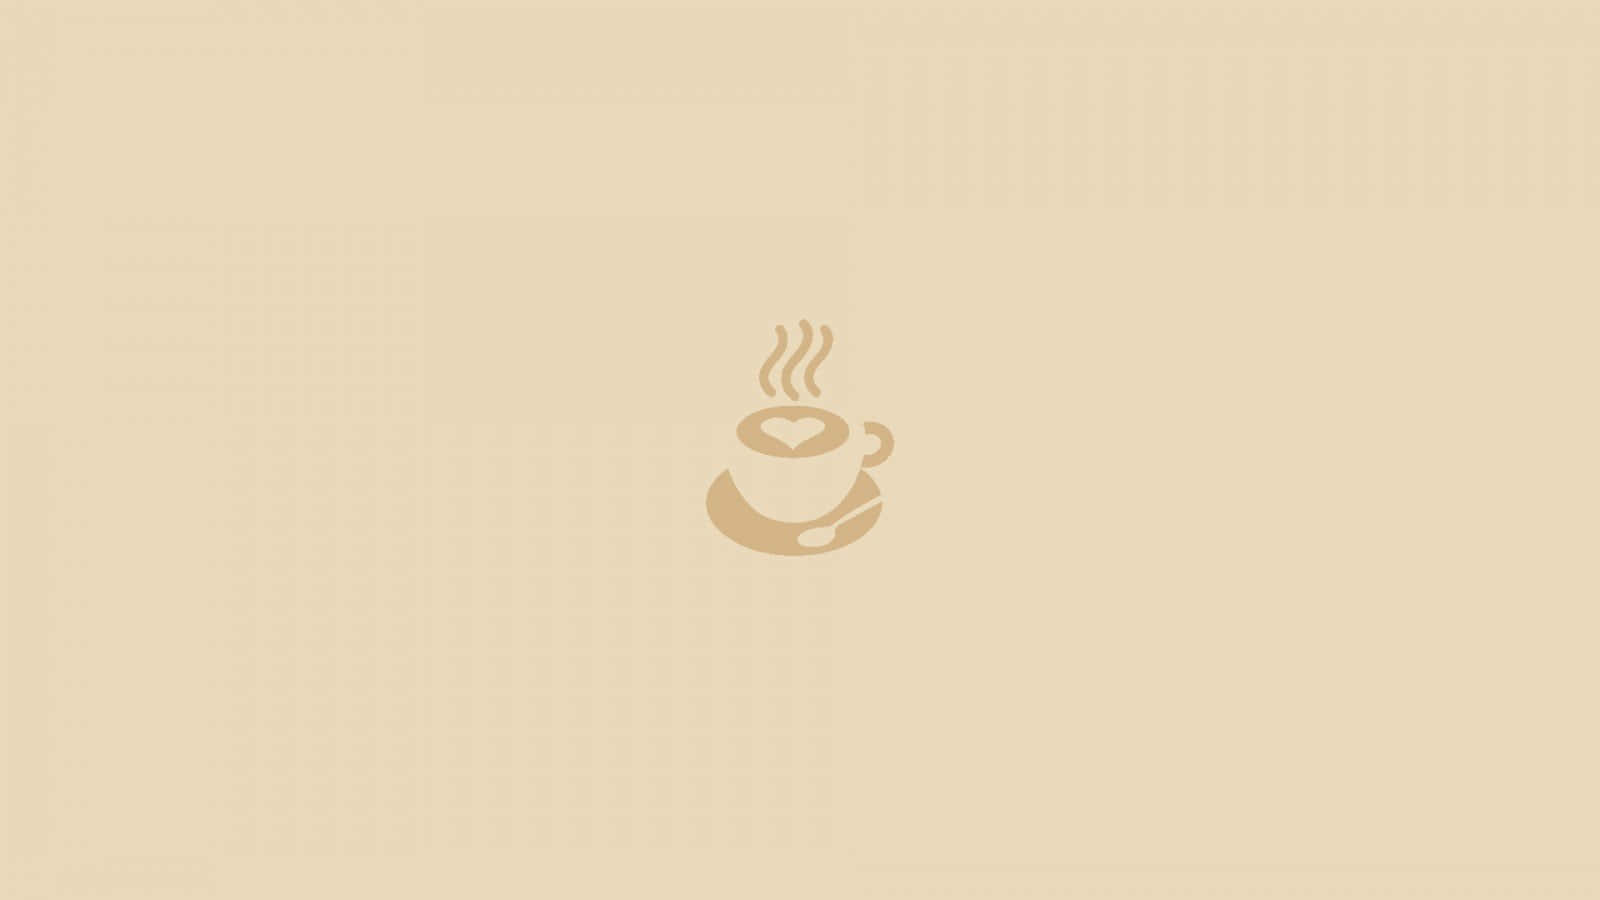 Coffee Logo Design - A Coffee Cup With A Coffee Cup